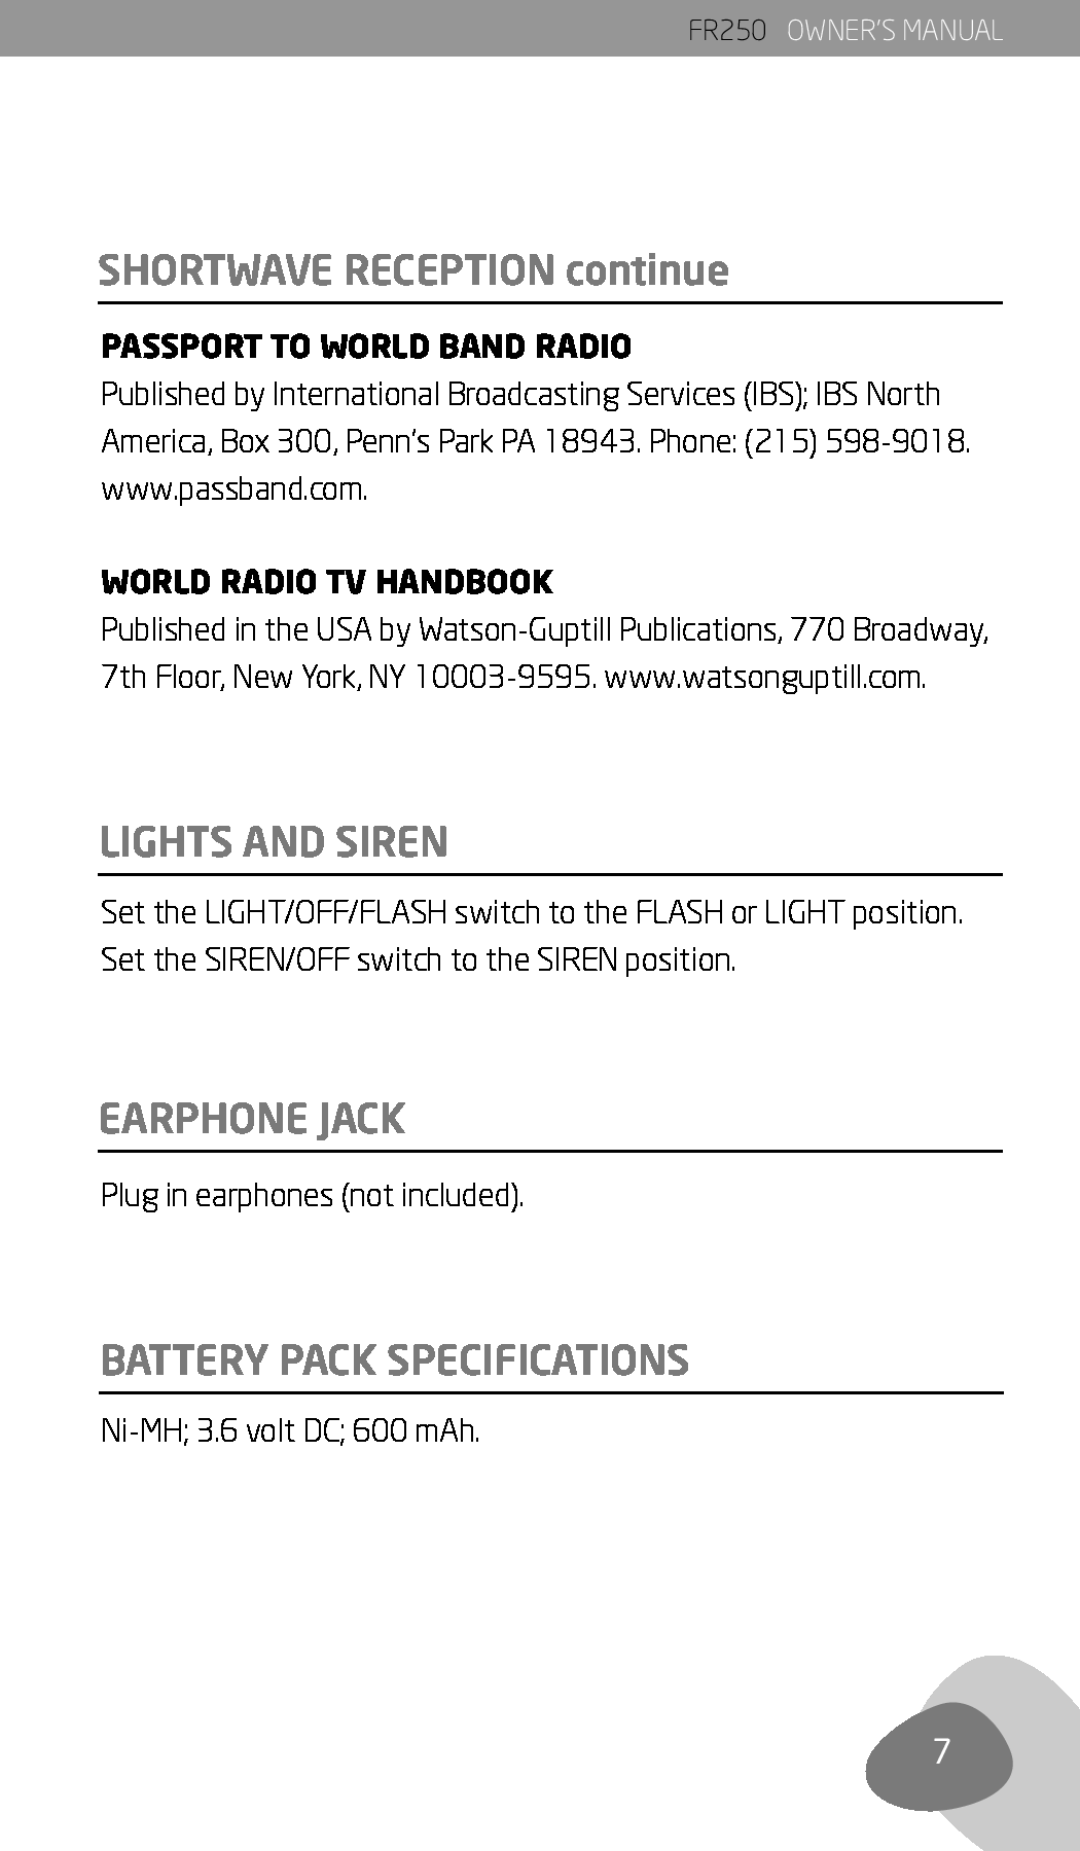 Eton FR250 owner manual SHORTWAVE RECEPTION continue, Lights And Siren, Earphone Jack, Battery Pack Specifications 